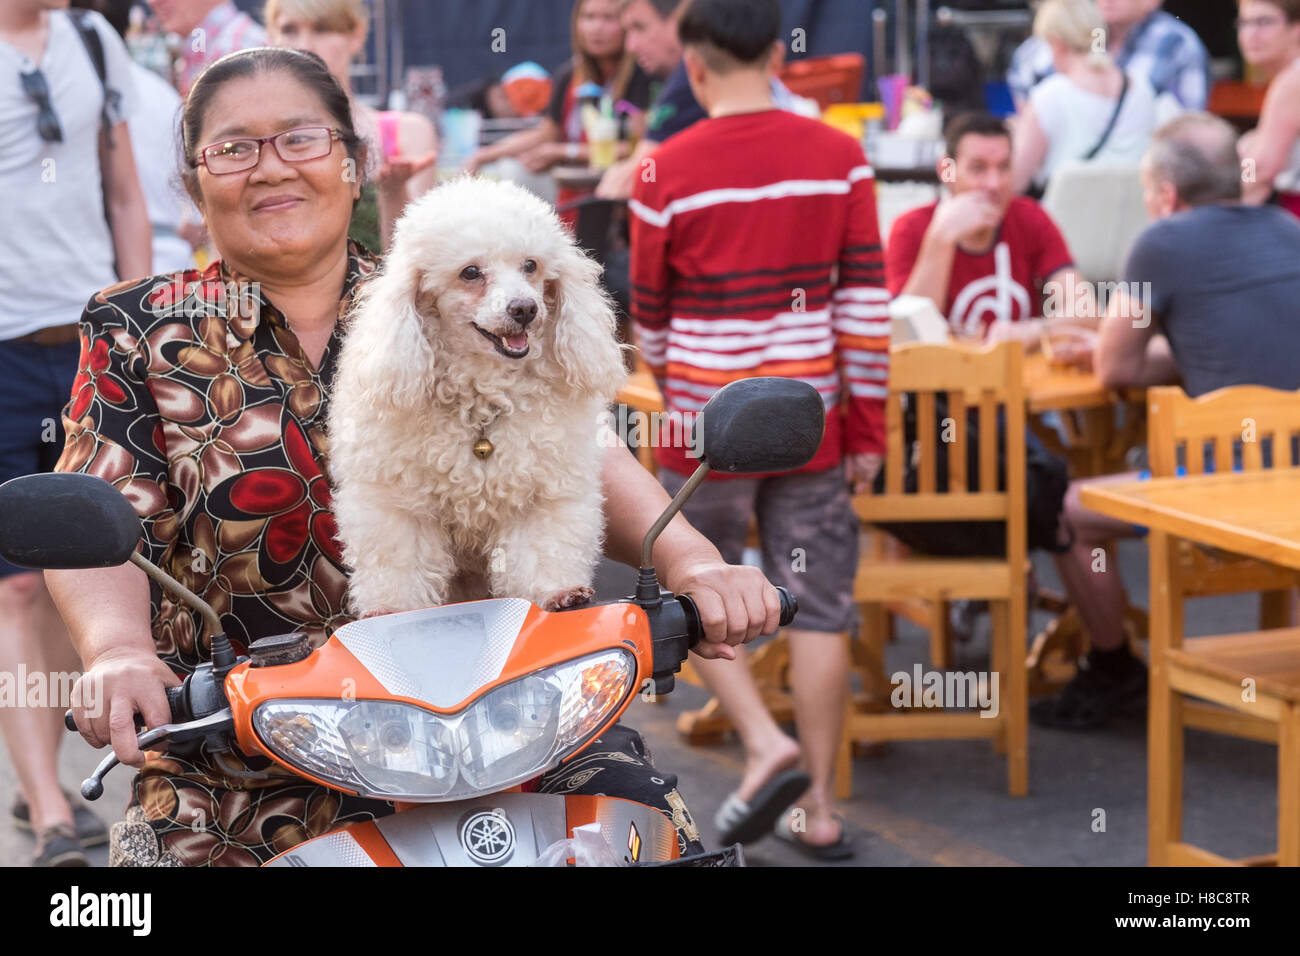 Thai woman riding with dog on a scooter at the night market in Hua Hin, Thailand Stock Photo